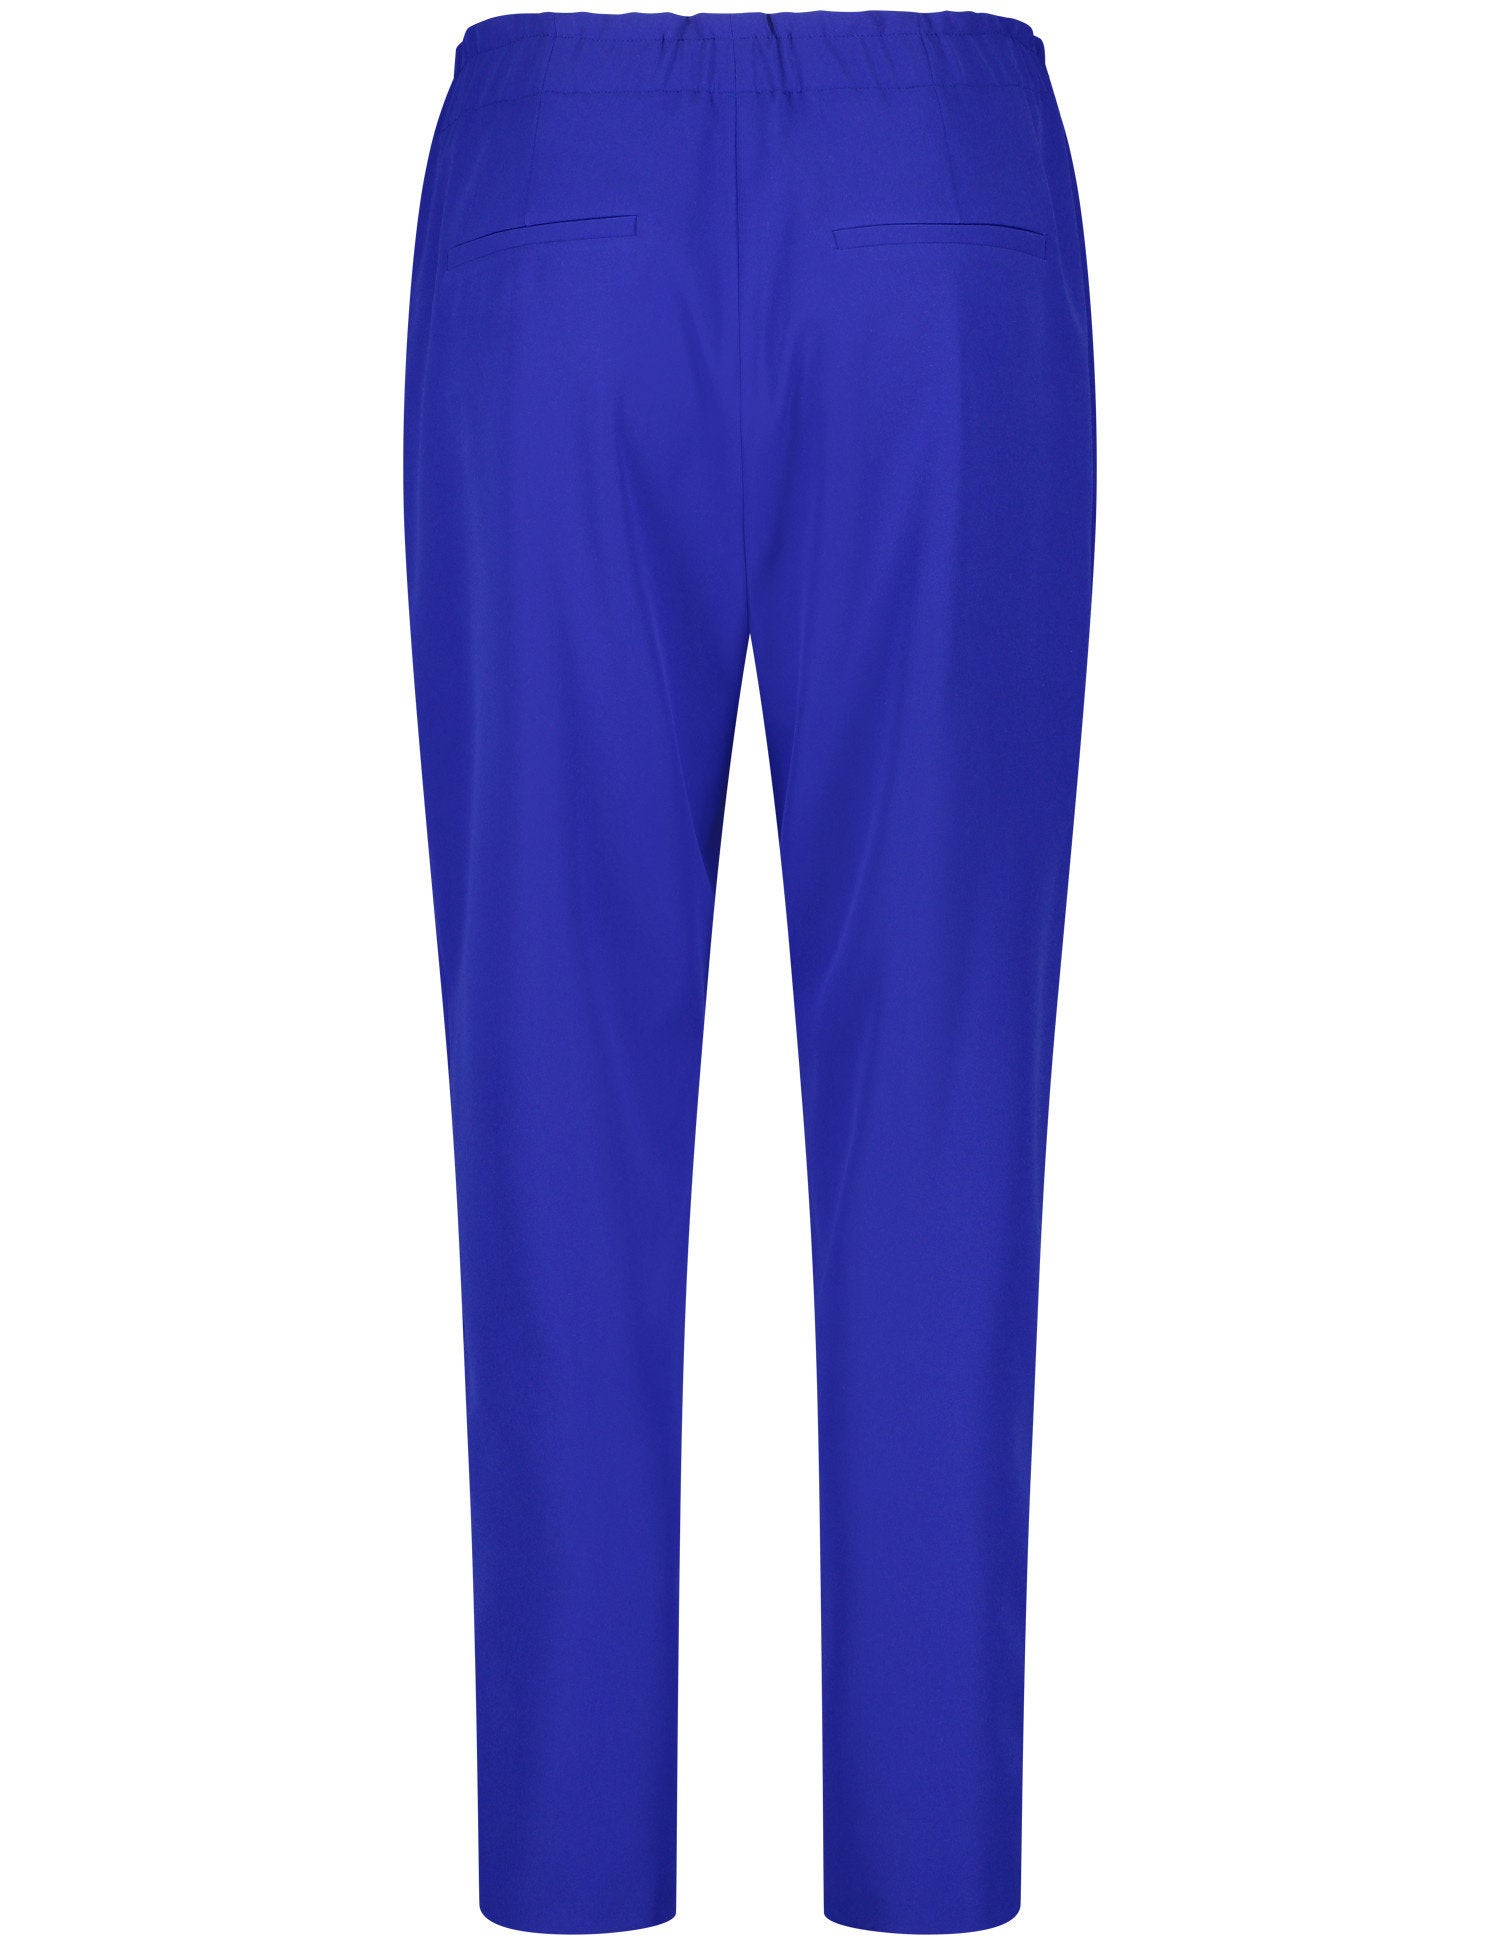 Flowing 7/8-Length Trousers In A Slim Fit_420430-11355_8790_03